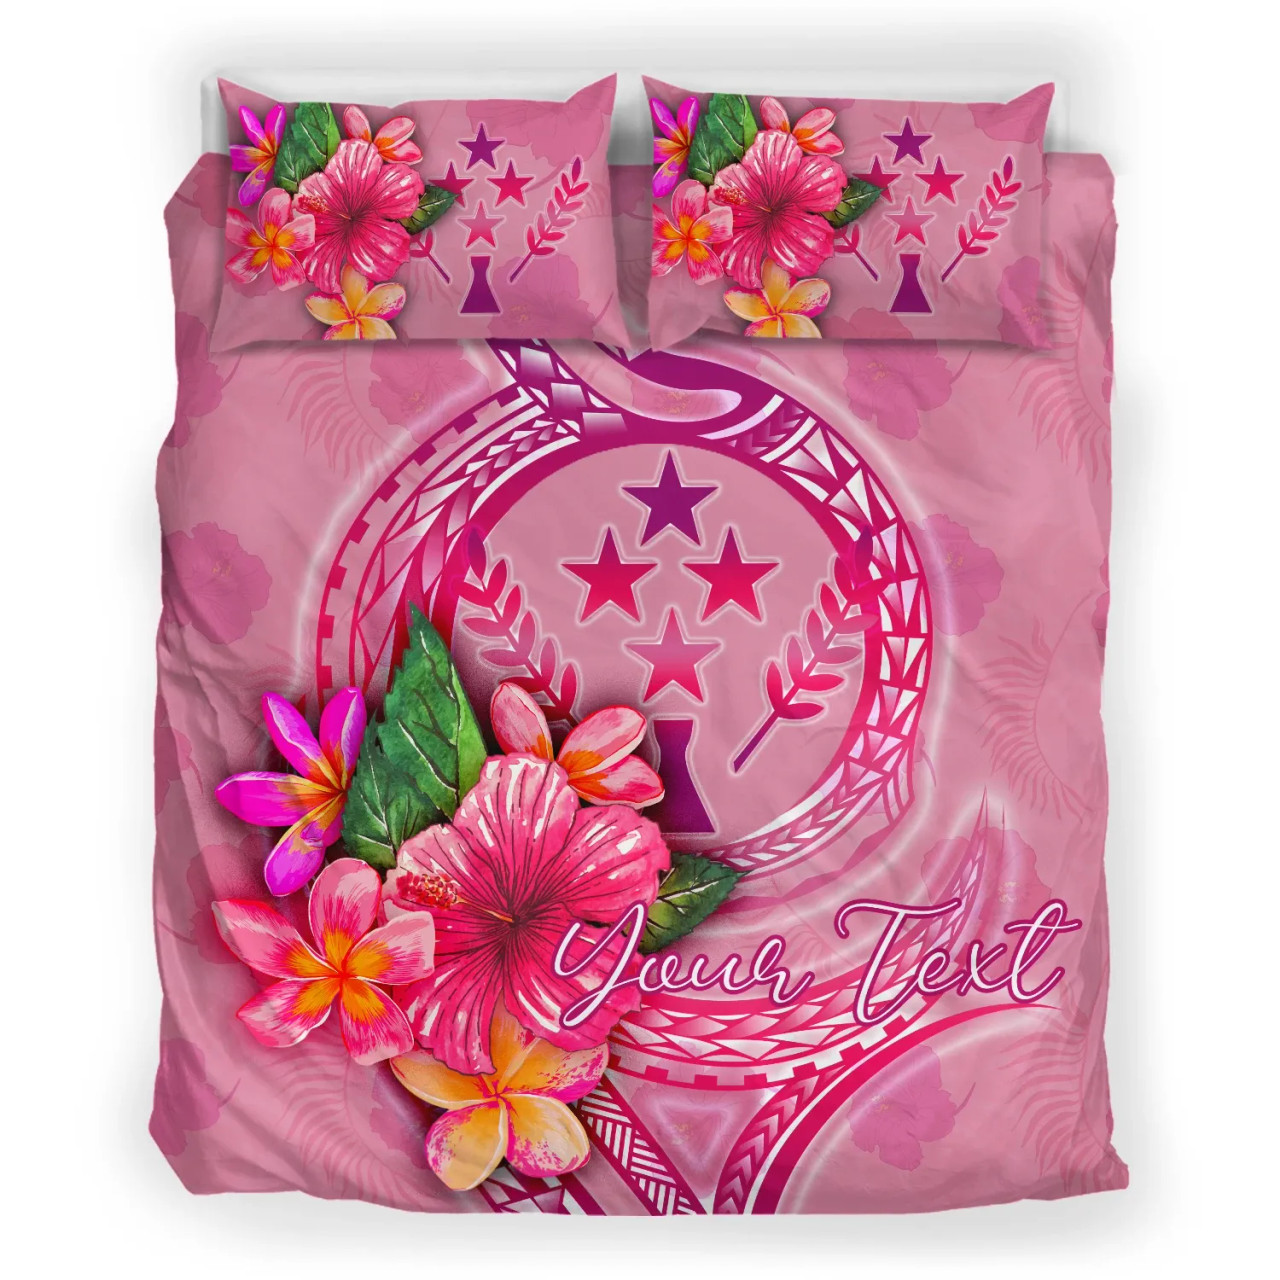 Tuvalu Polynesian Bedding Set - Floral With Seal Pink 4